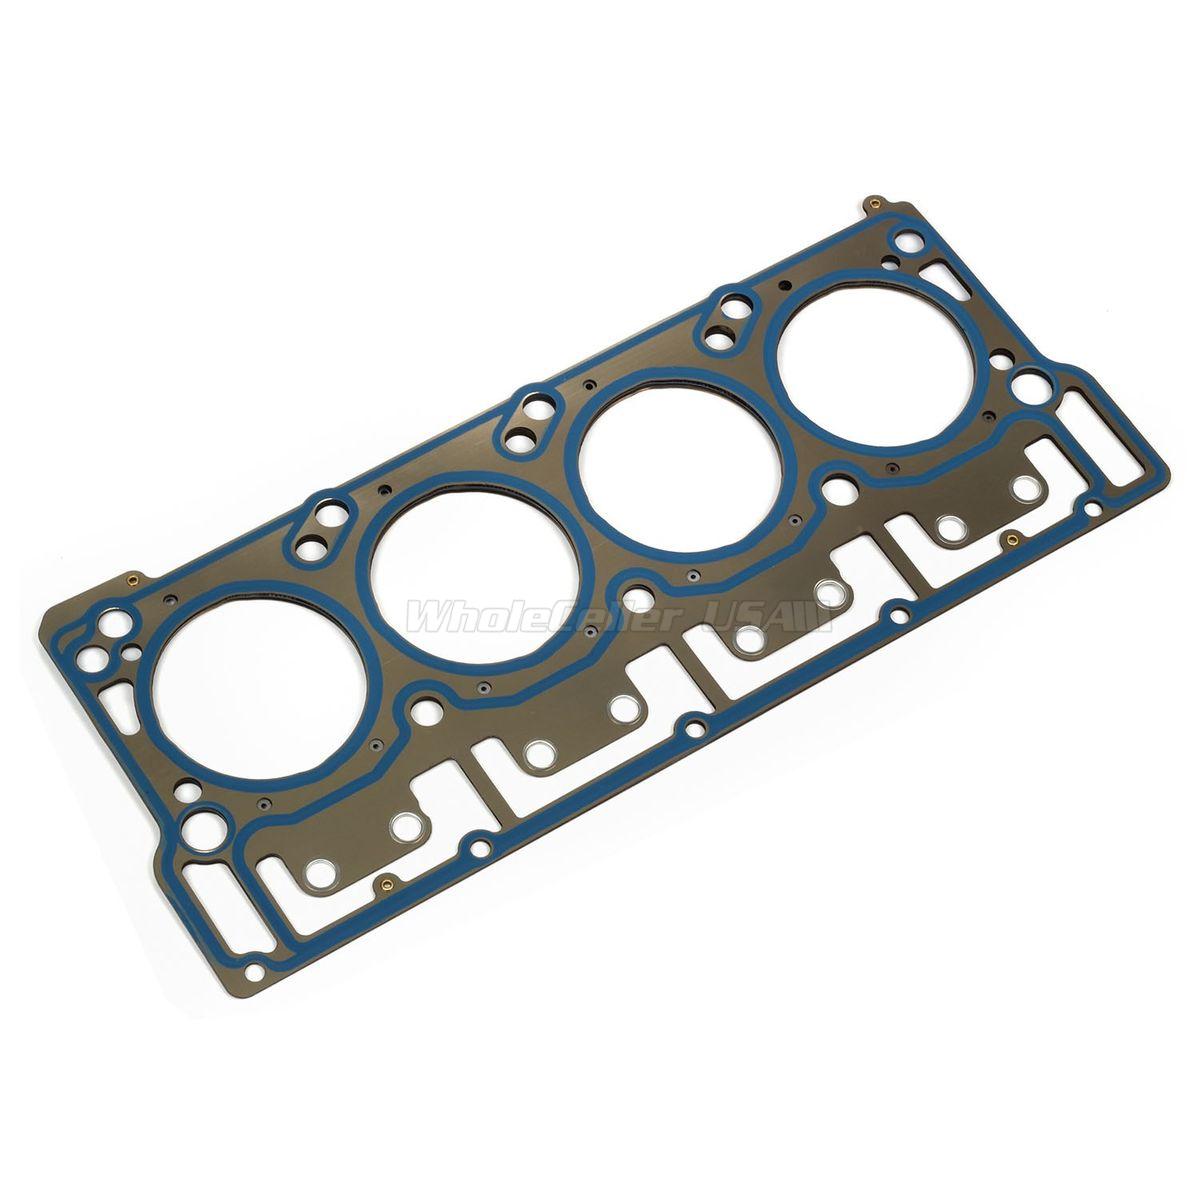 MLS Head Gasket For Ford F-250 F-350 F-550 E-350 6.0L Diesel Turbo 20mm 2006 Ford F350 6.0 Head Gasket Replacement